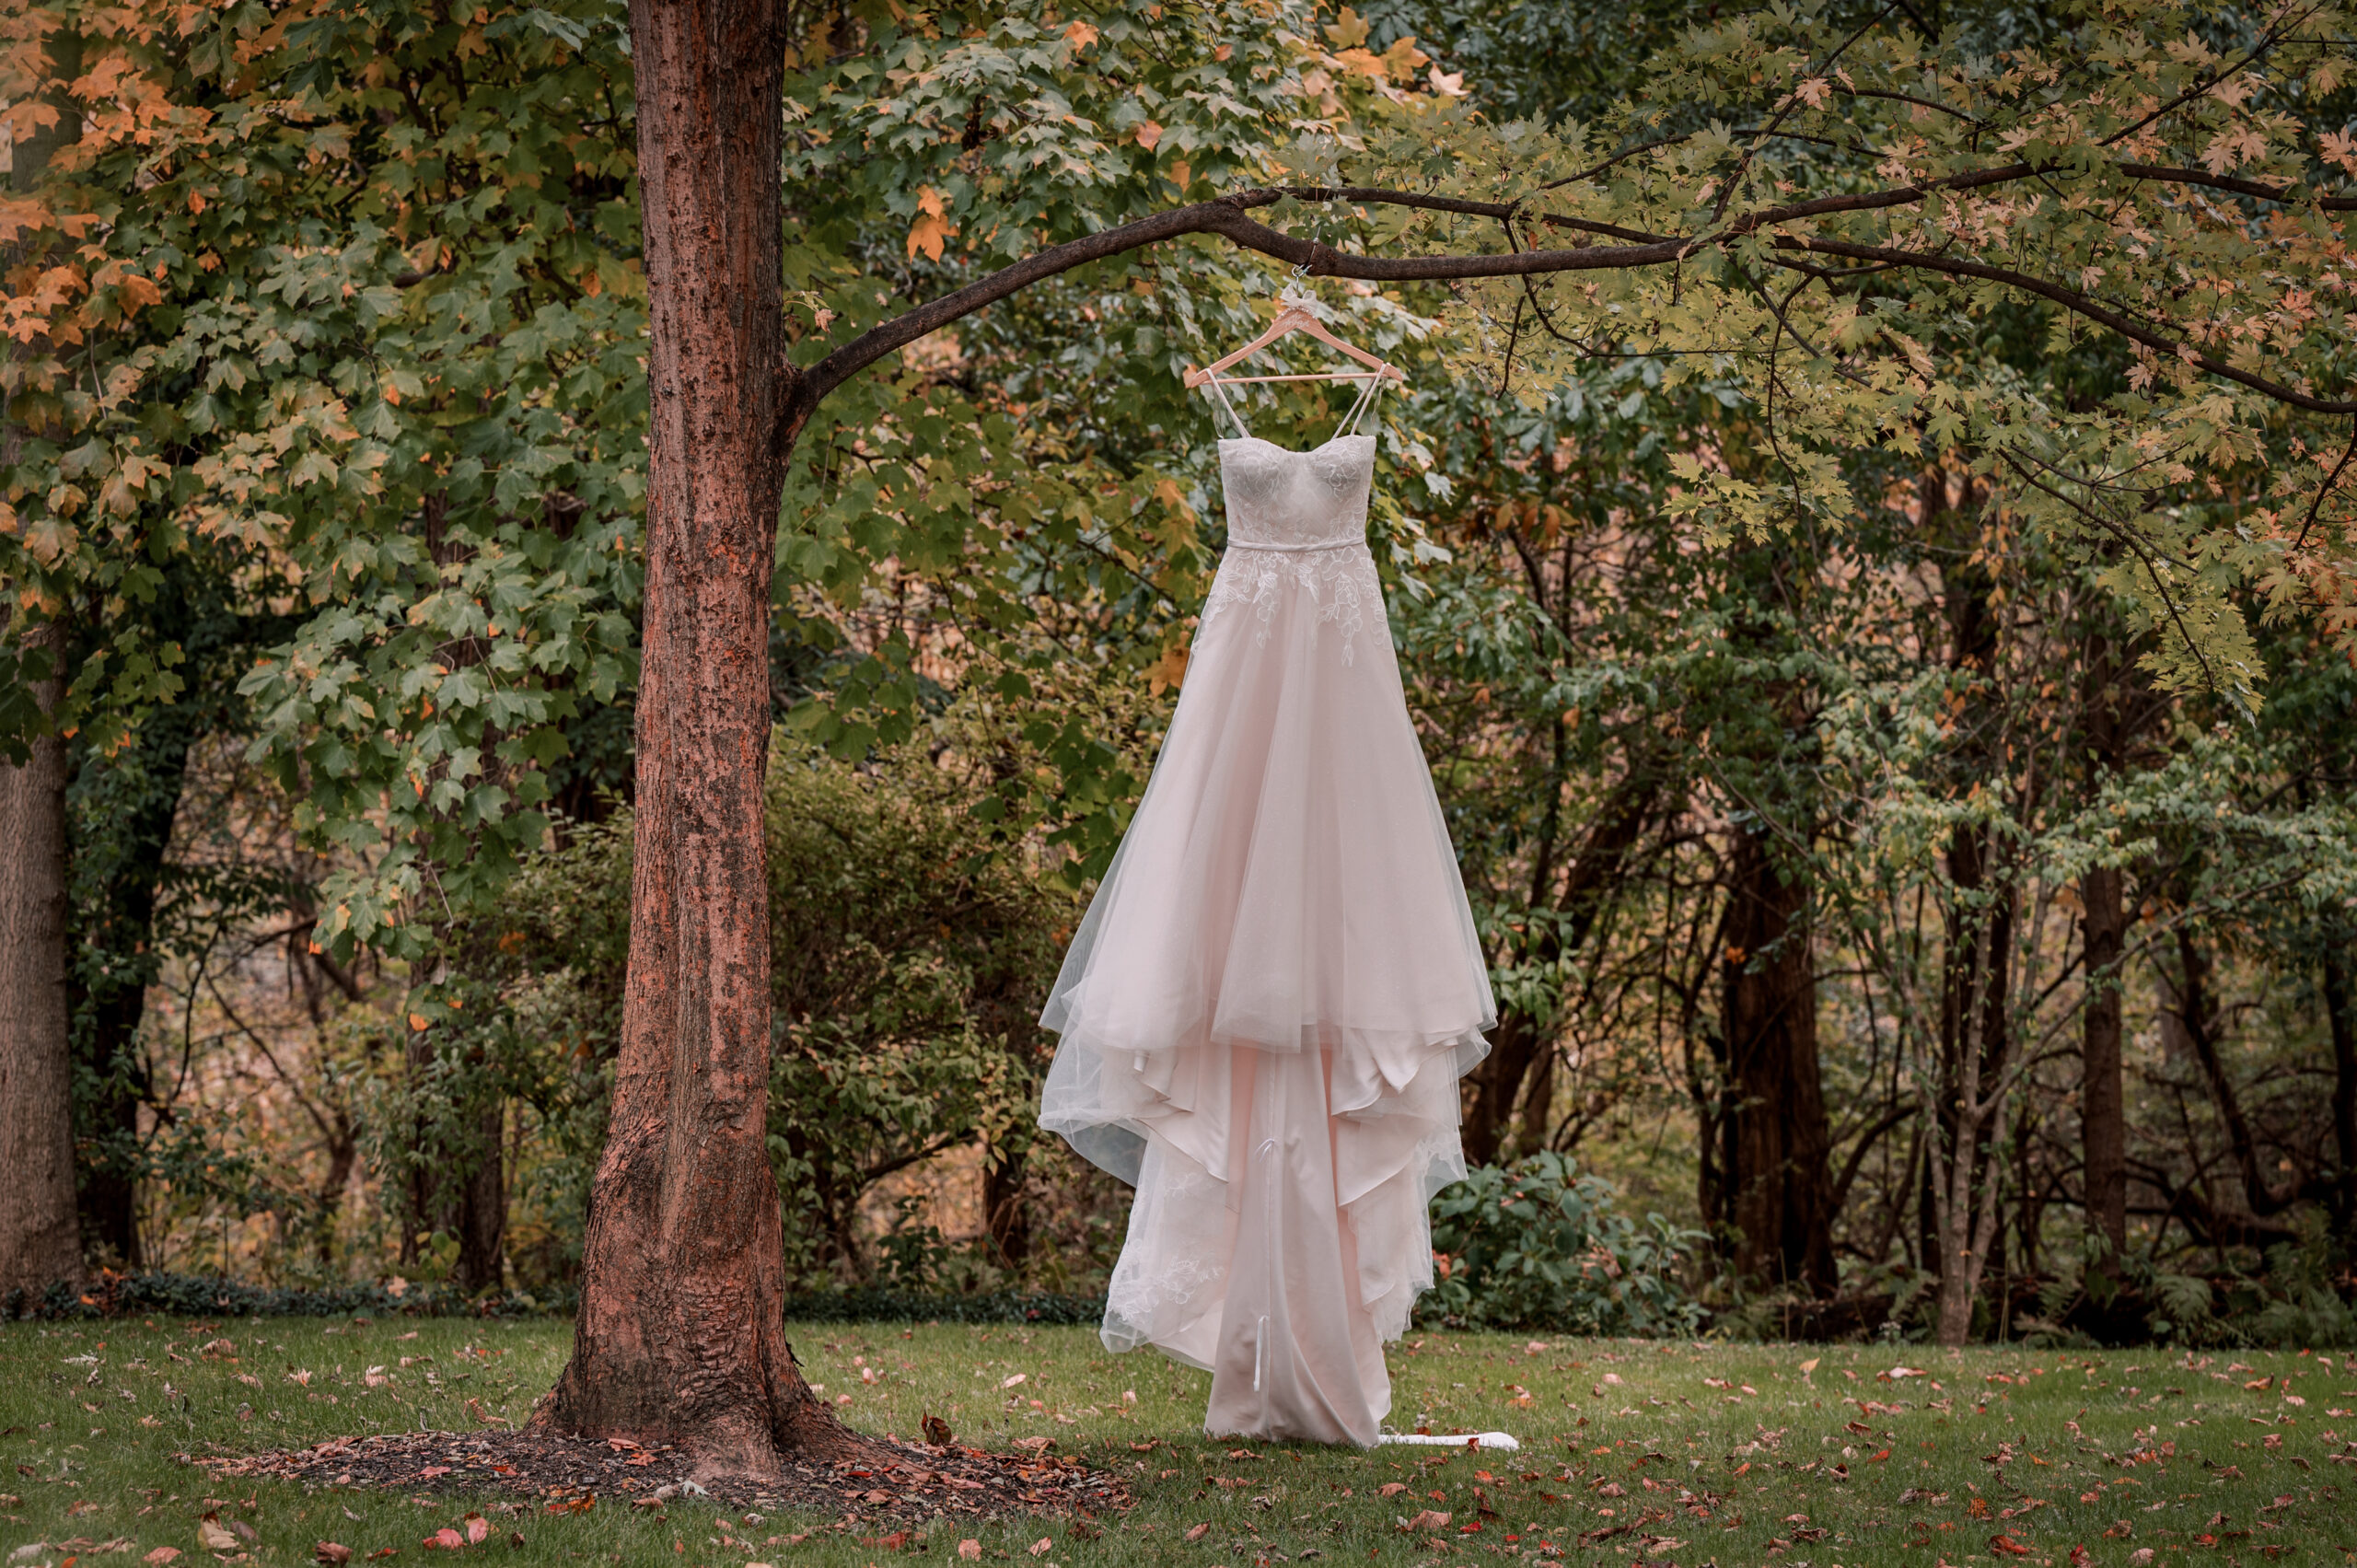 Bridal gown hanging from a tree in the fall